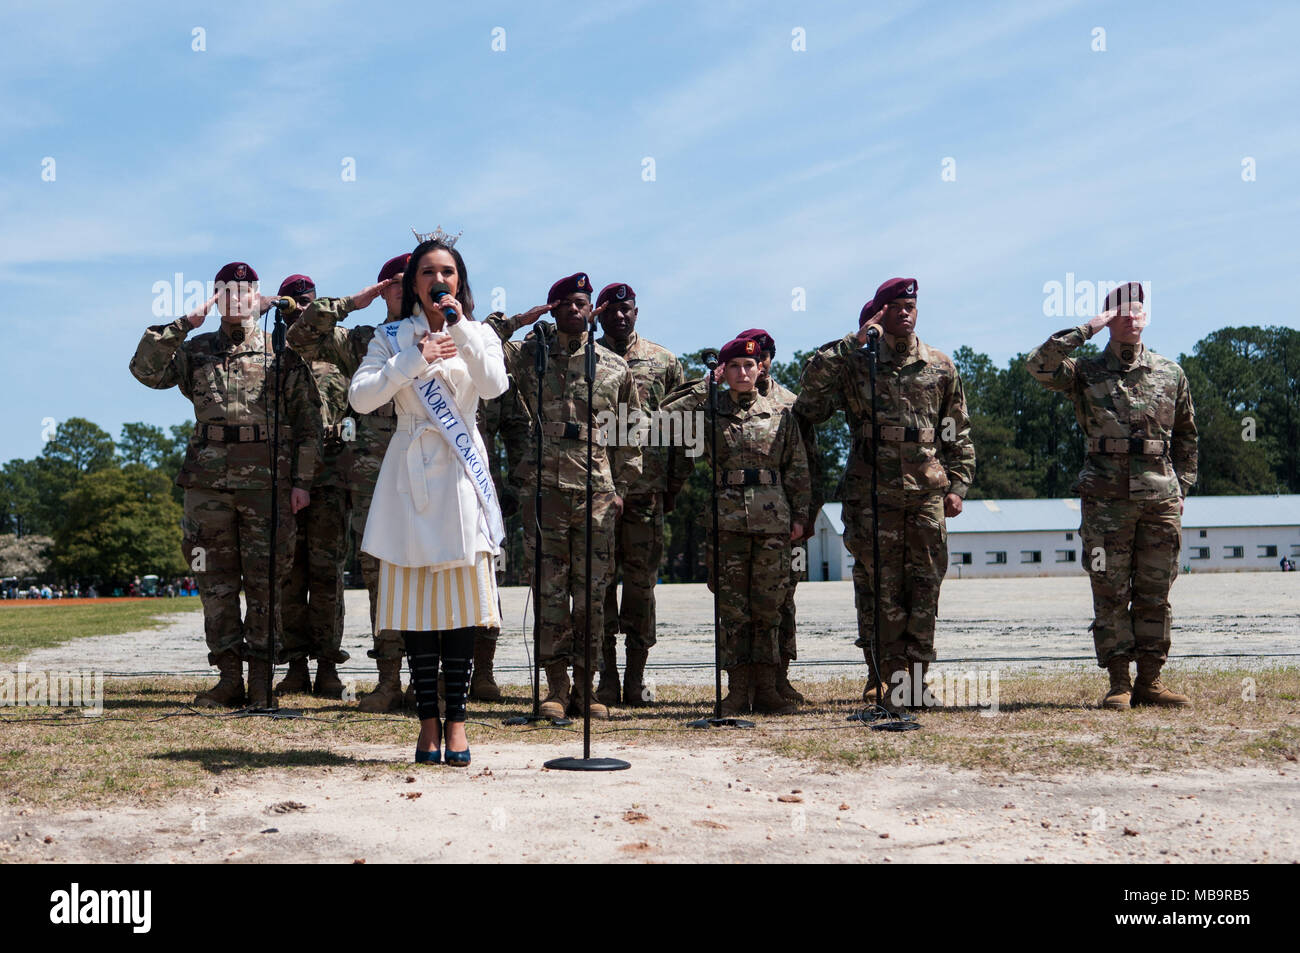 Pinehurst, North Carolina, USA. 8th Apr, 2018. April 8, 2018 - Pinehurst, N.C., USA - Miss North Carolina Victoria Huggins, sings the national anthem in front of the 82nd Airborne Division All American Chorus at the 69th annual Spring Matinee Harness races sponsored by the Pinehurst Driving & Training Club, at the Pinehurst Harness Track, Pinehurst, N.C. The Pinehurst Harness Track is a 111-acre equestrian facility that has been a winter training center for standardbred horses since 1915. This year's races commemorate the 103rd anniversary of the track. (Credit Image: © Timothy L. Hale via Z Stock Photo